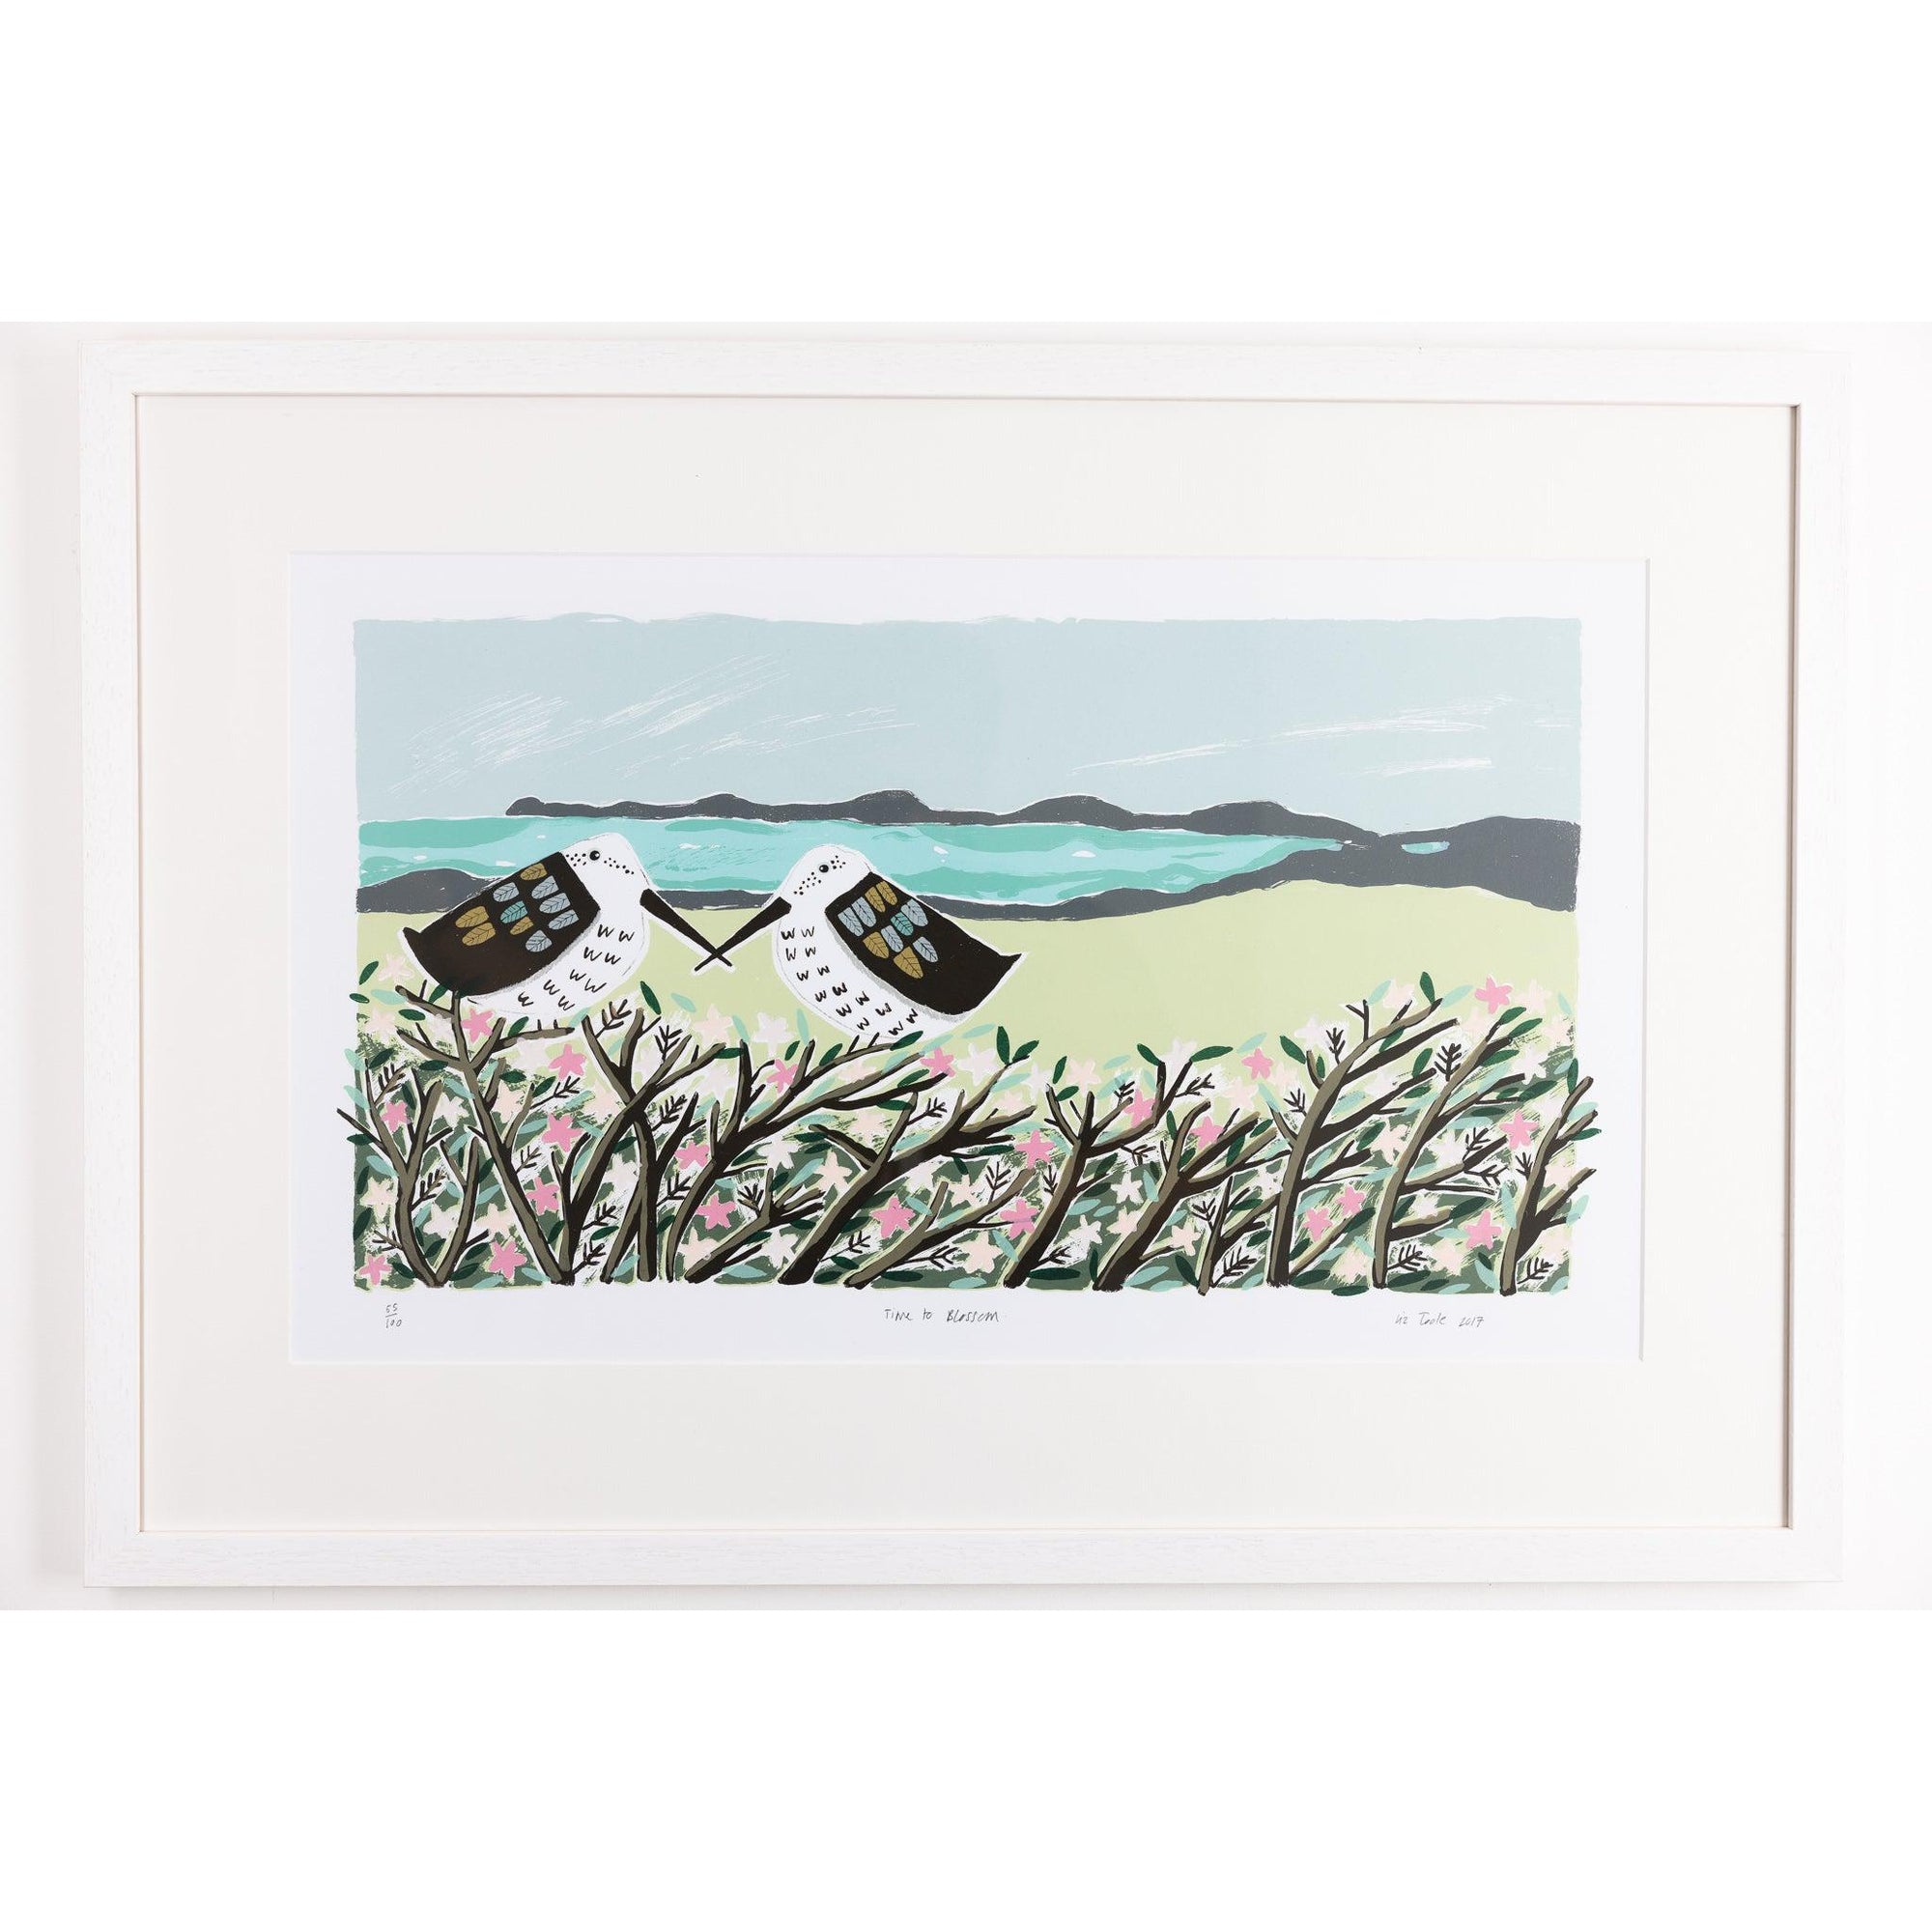 'Time to Blossom' framed, limited edition print by Liz Toole at Padstow Gallery, Cornwall.